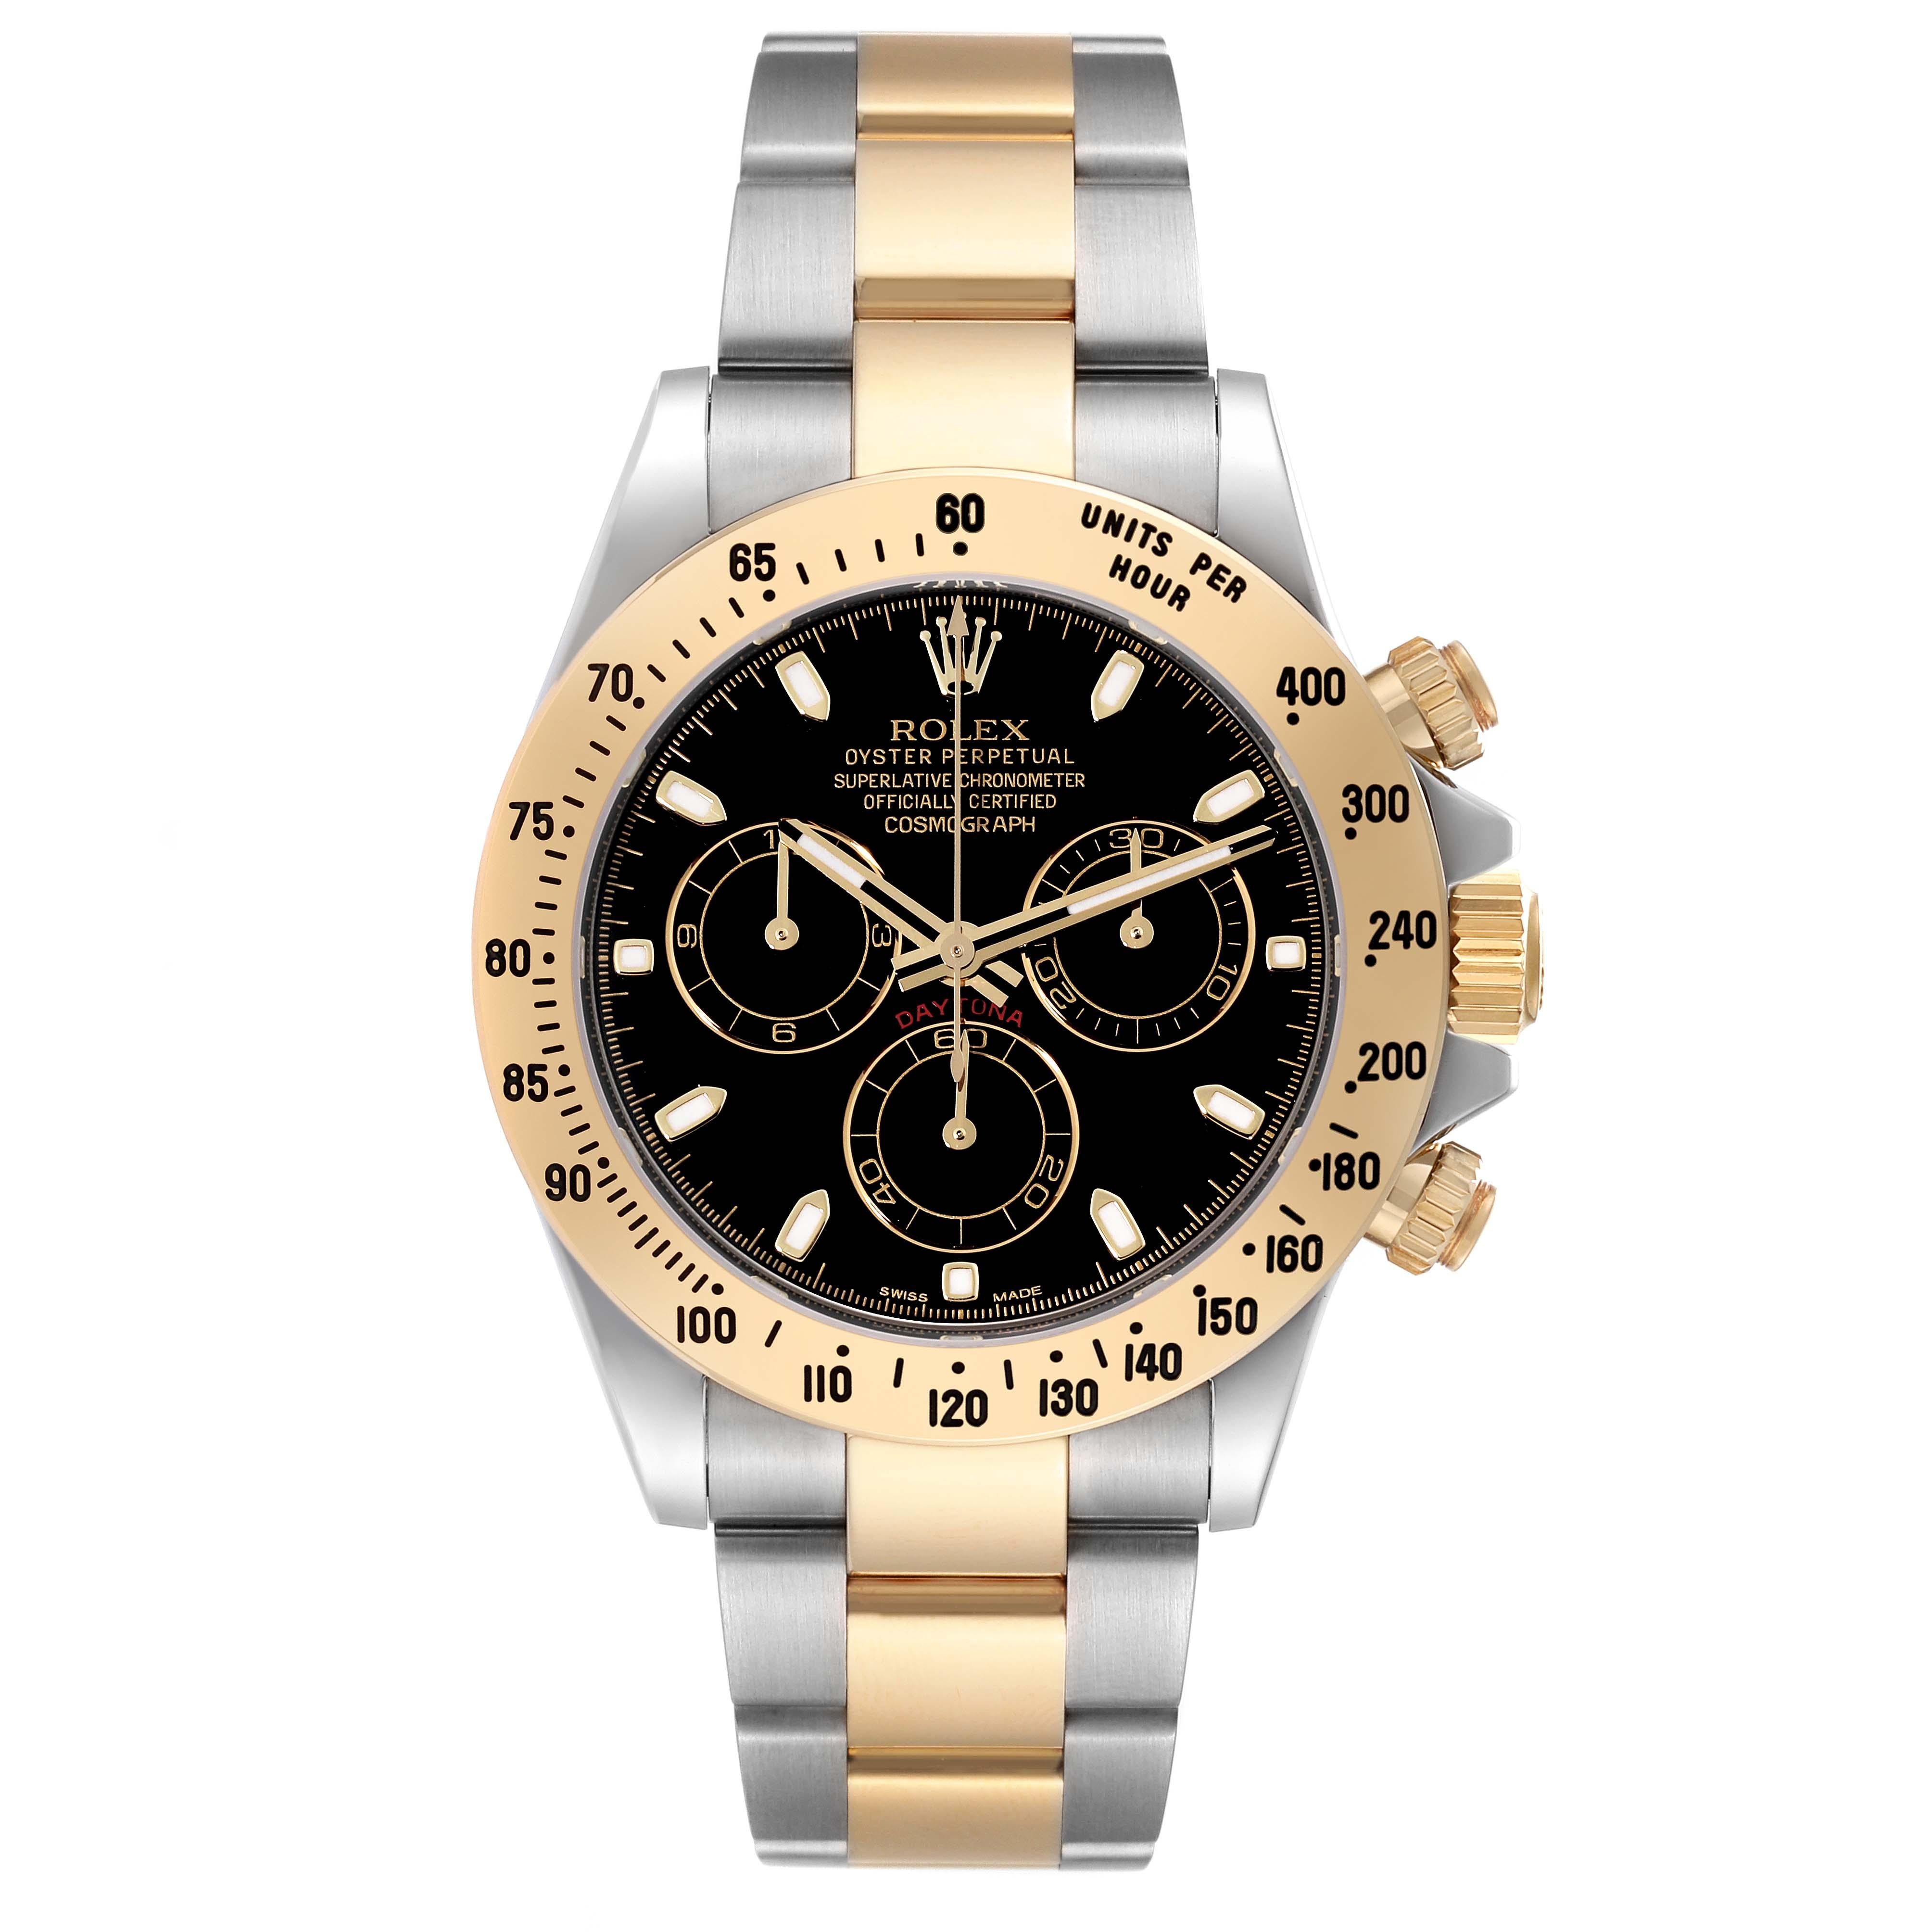 Rolex Daytona Steel Yellow Gold Black Dial Mens Watch 116523. Officially certified chronometer automatic self-winding movement. Rhodium-plated, oeil-de-perdrix decoration, straight line lever escapement, monometallic balance adjusted to 5 positions,